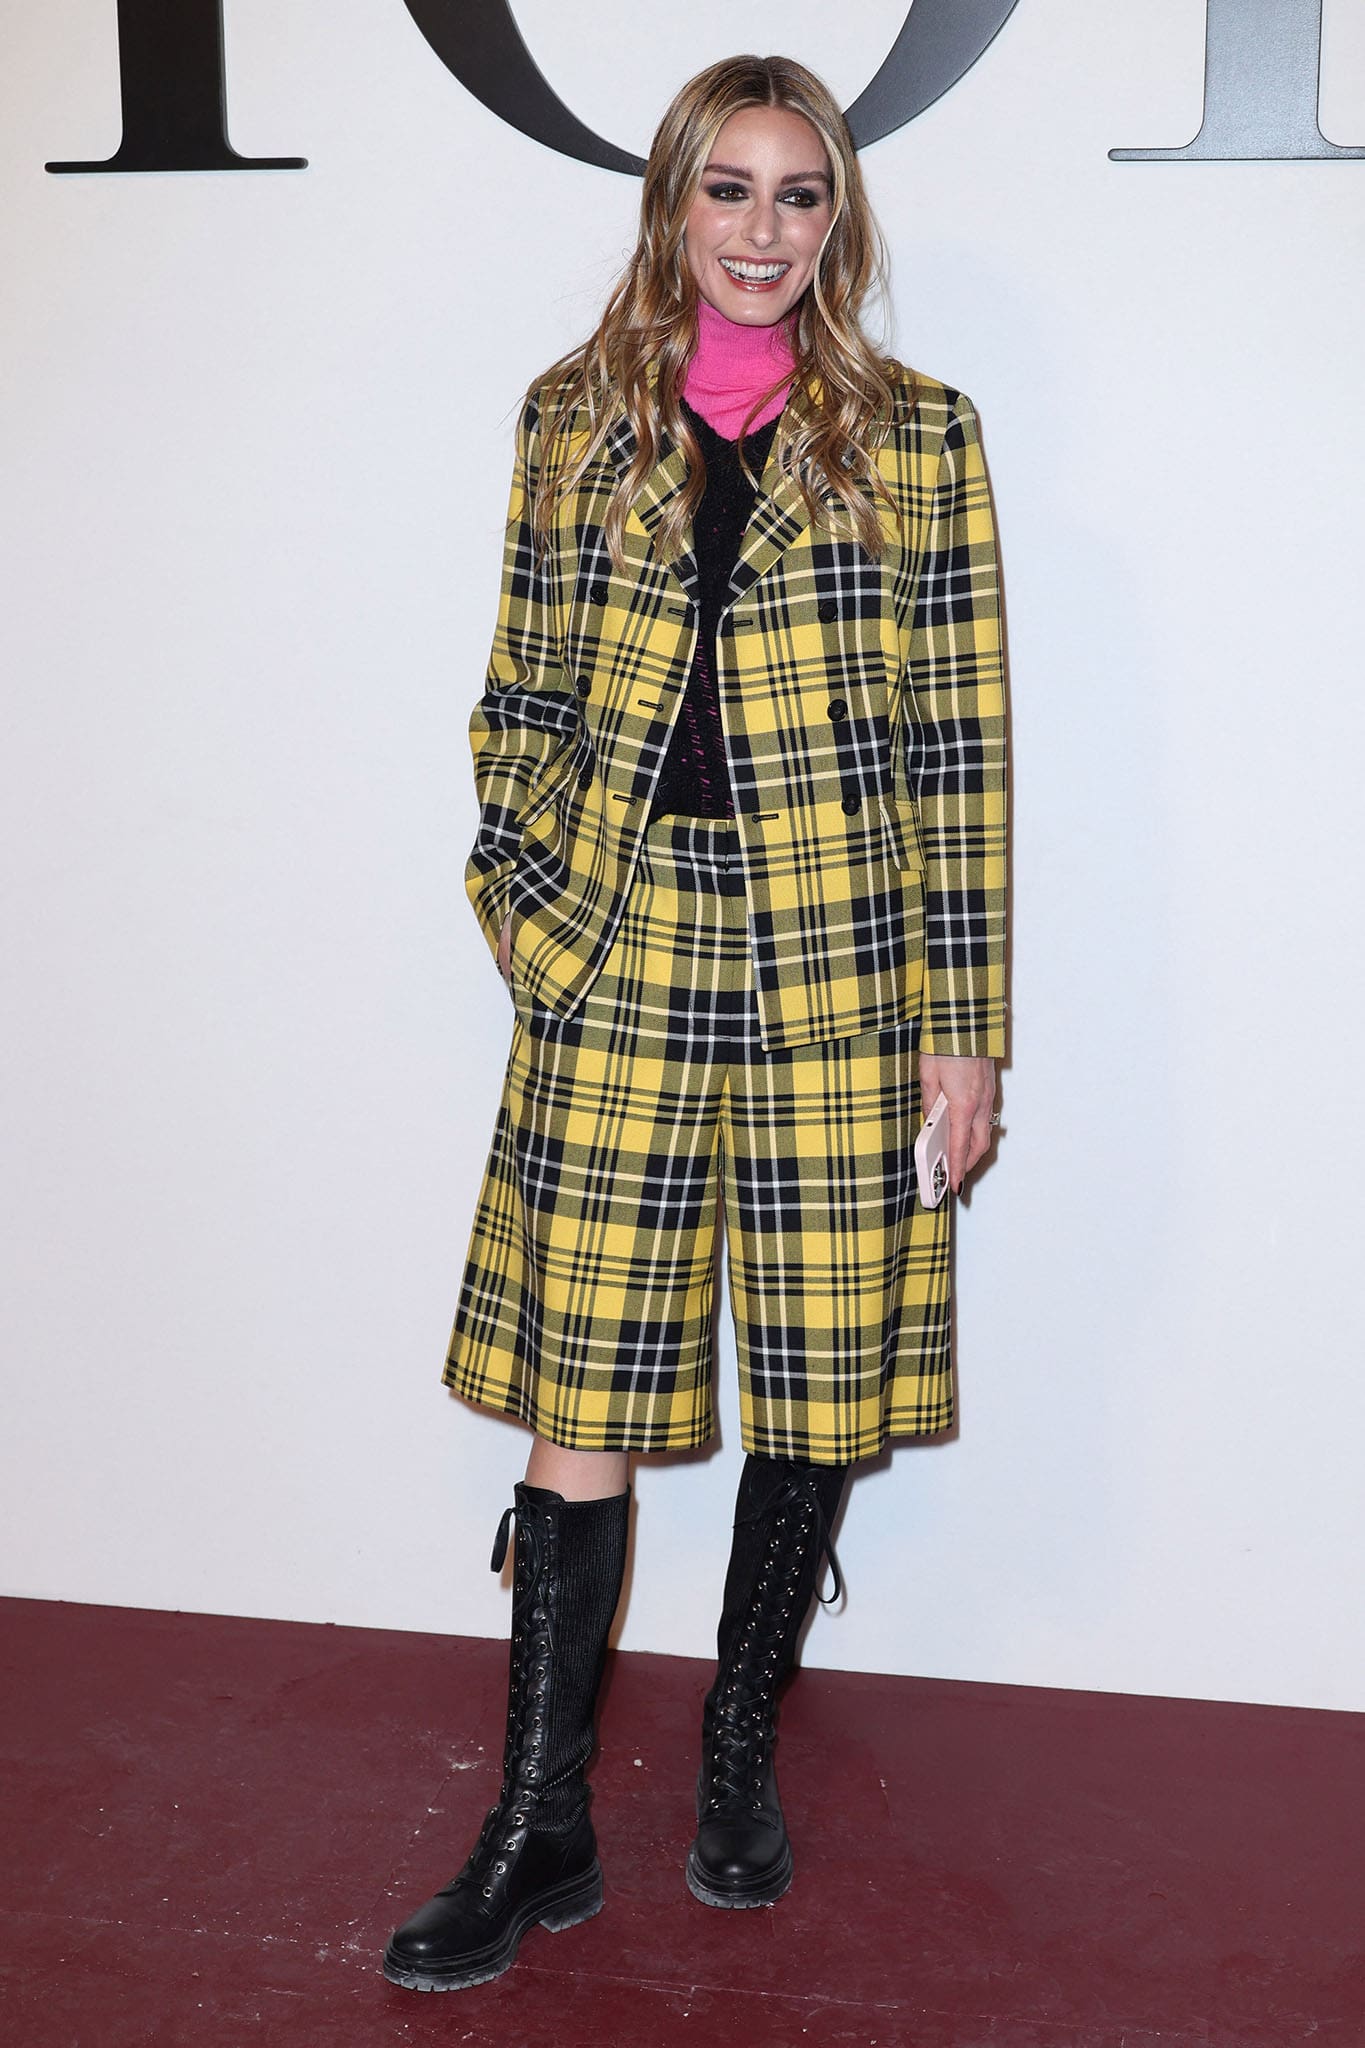 Olivia Palermo wears a Clueless-inspired yellow tartan jacket and matching culottes with knee-high combat boots at the Dior Paris Fashion Week show on March 1, 2022